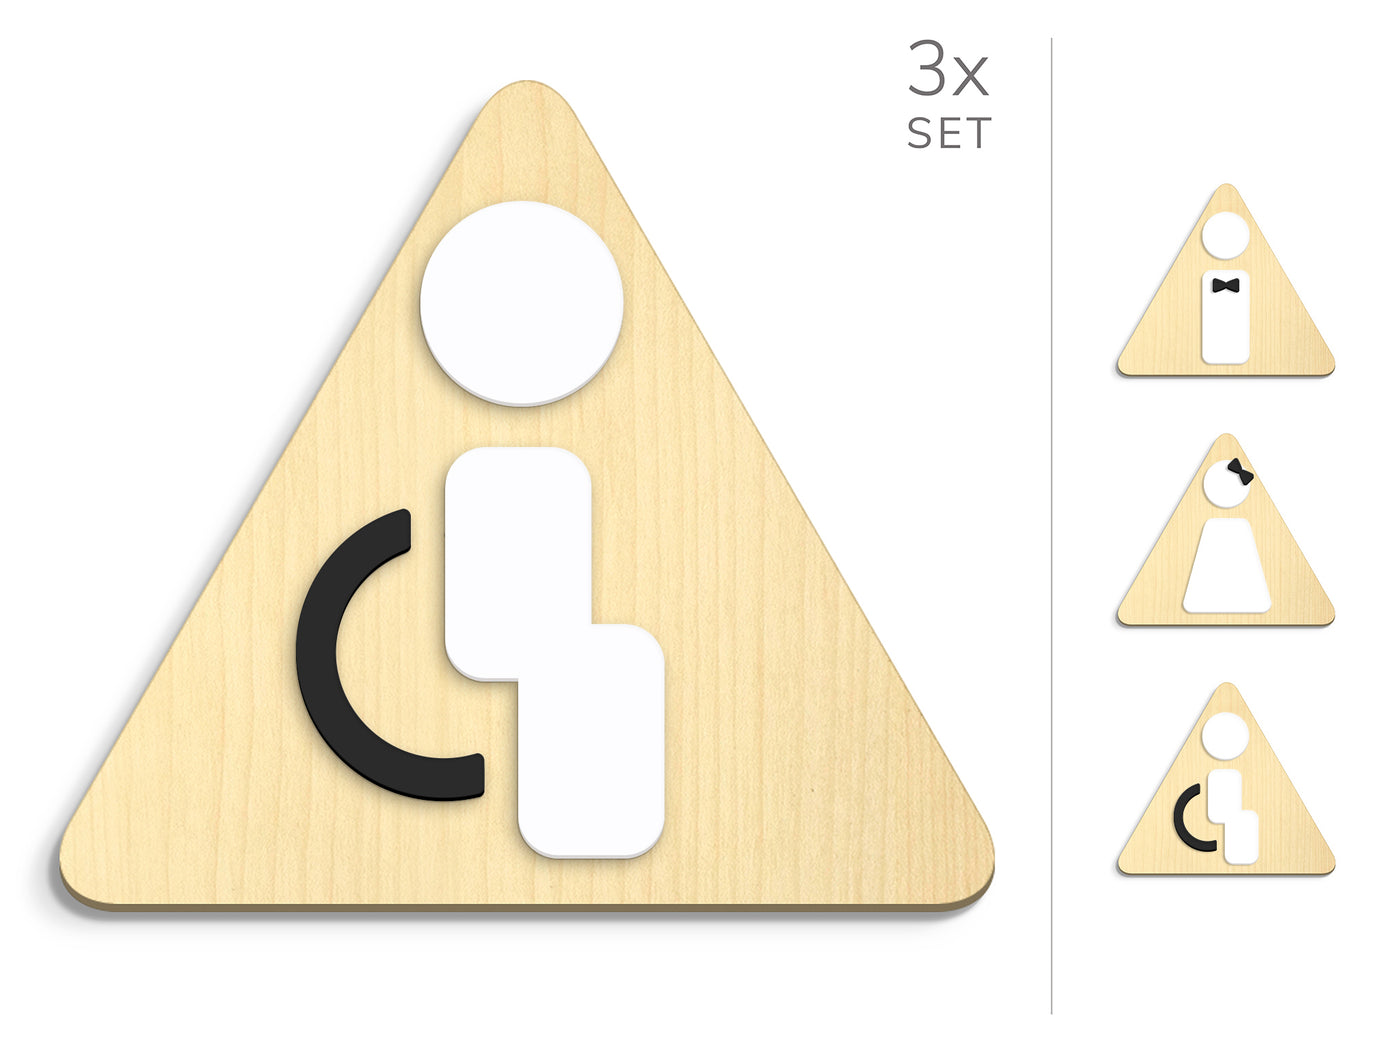 Styled knot, 3x Triangle Base - Restroom Signs Set - Man, Woman, Disabled